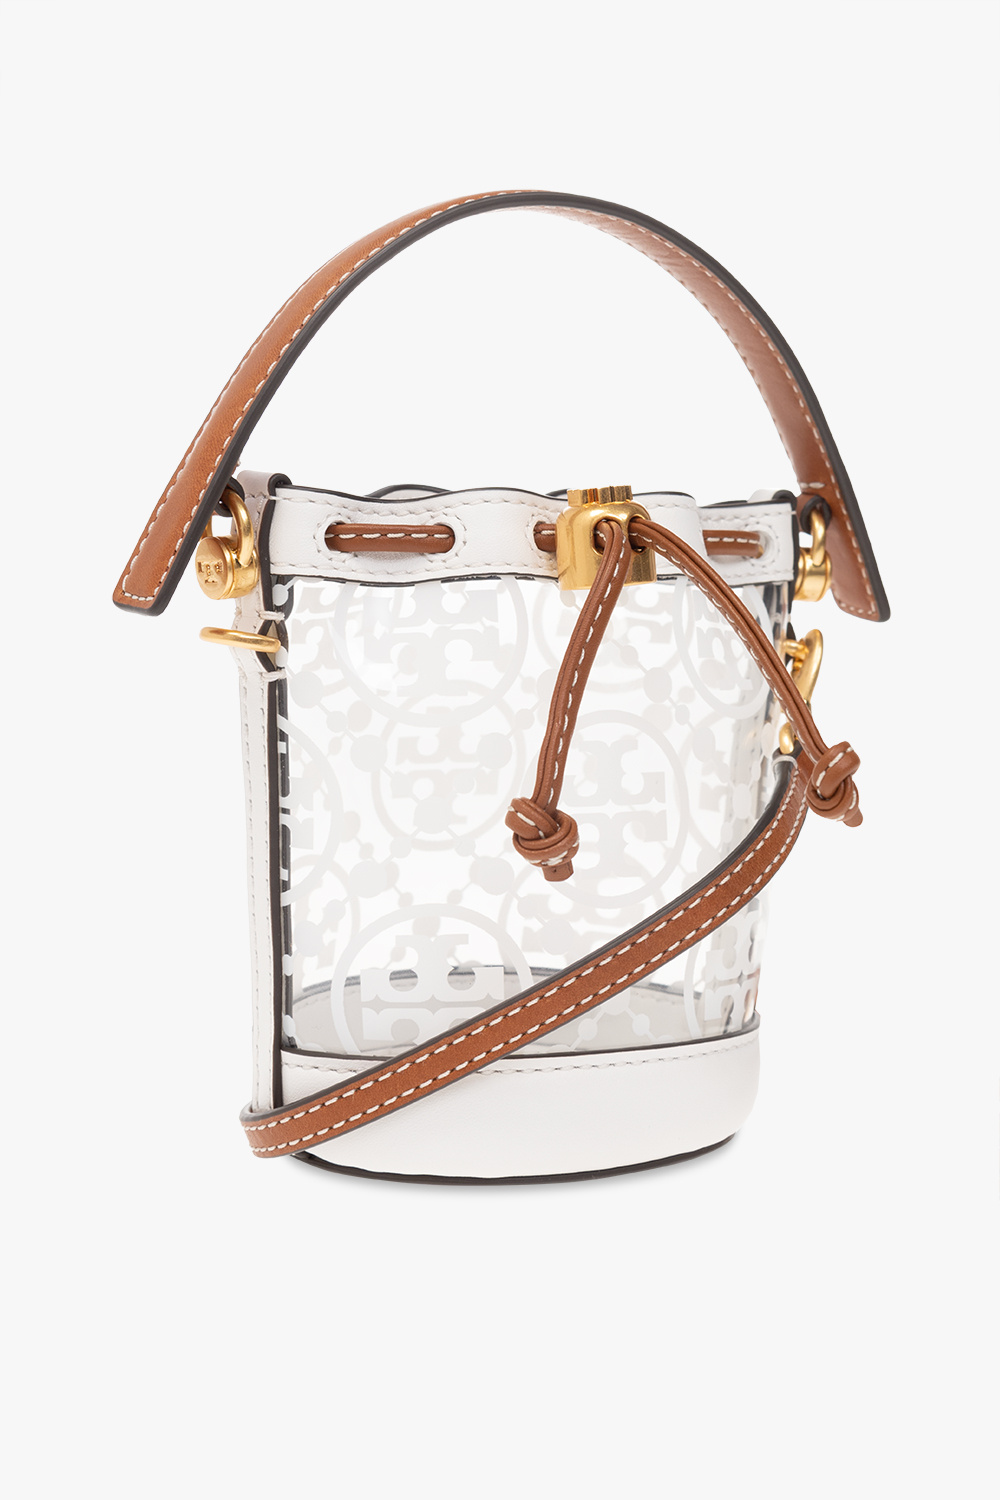 Tory Burch T Monogram Clear Micro Bucket Bag in White